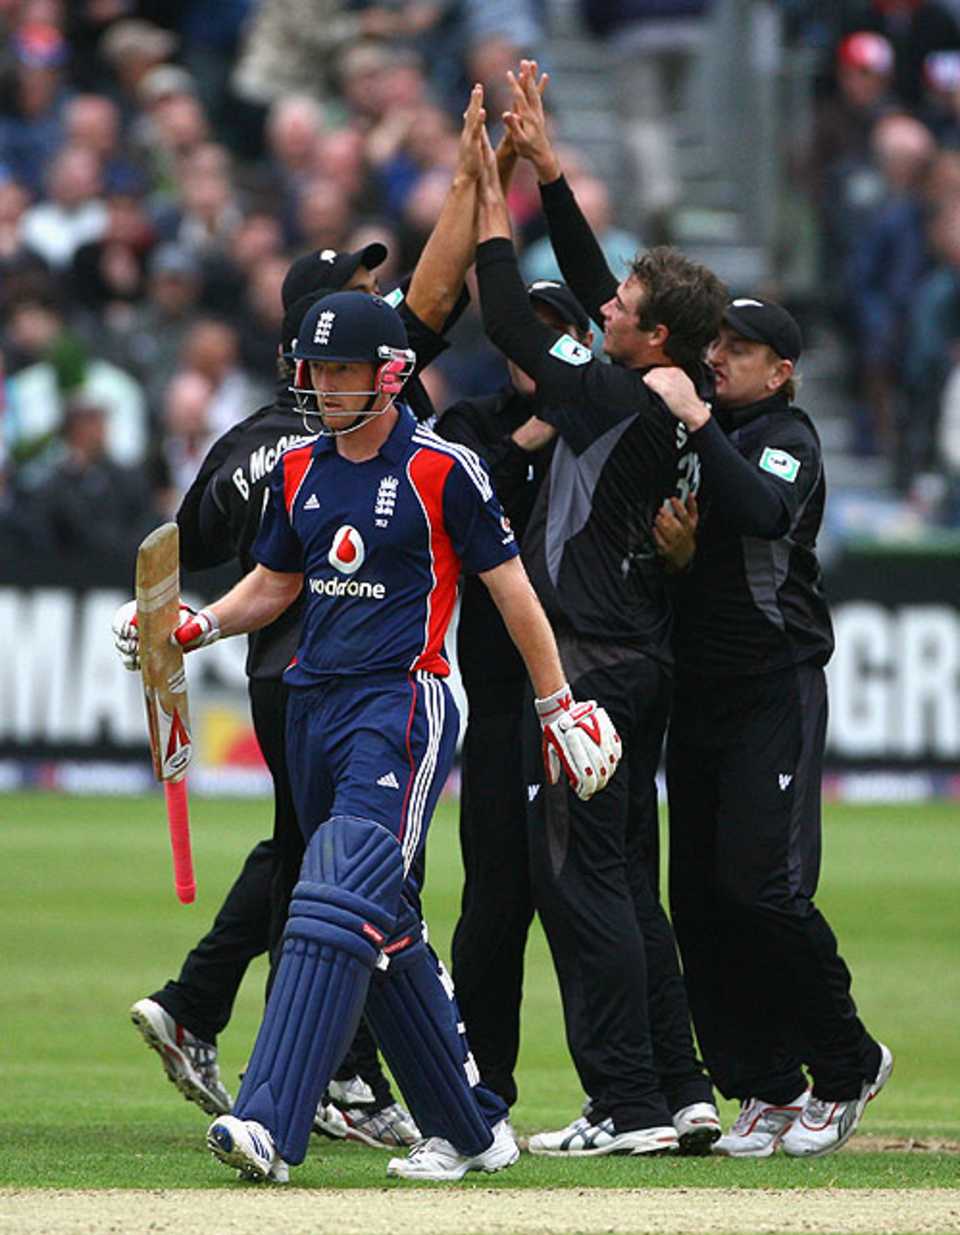 Paul Collingwood departs as New Zealand close in on victory, England v New Zealand, 3rd ODI, Bristol, June 21, 2008